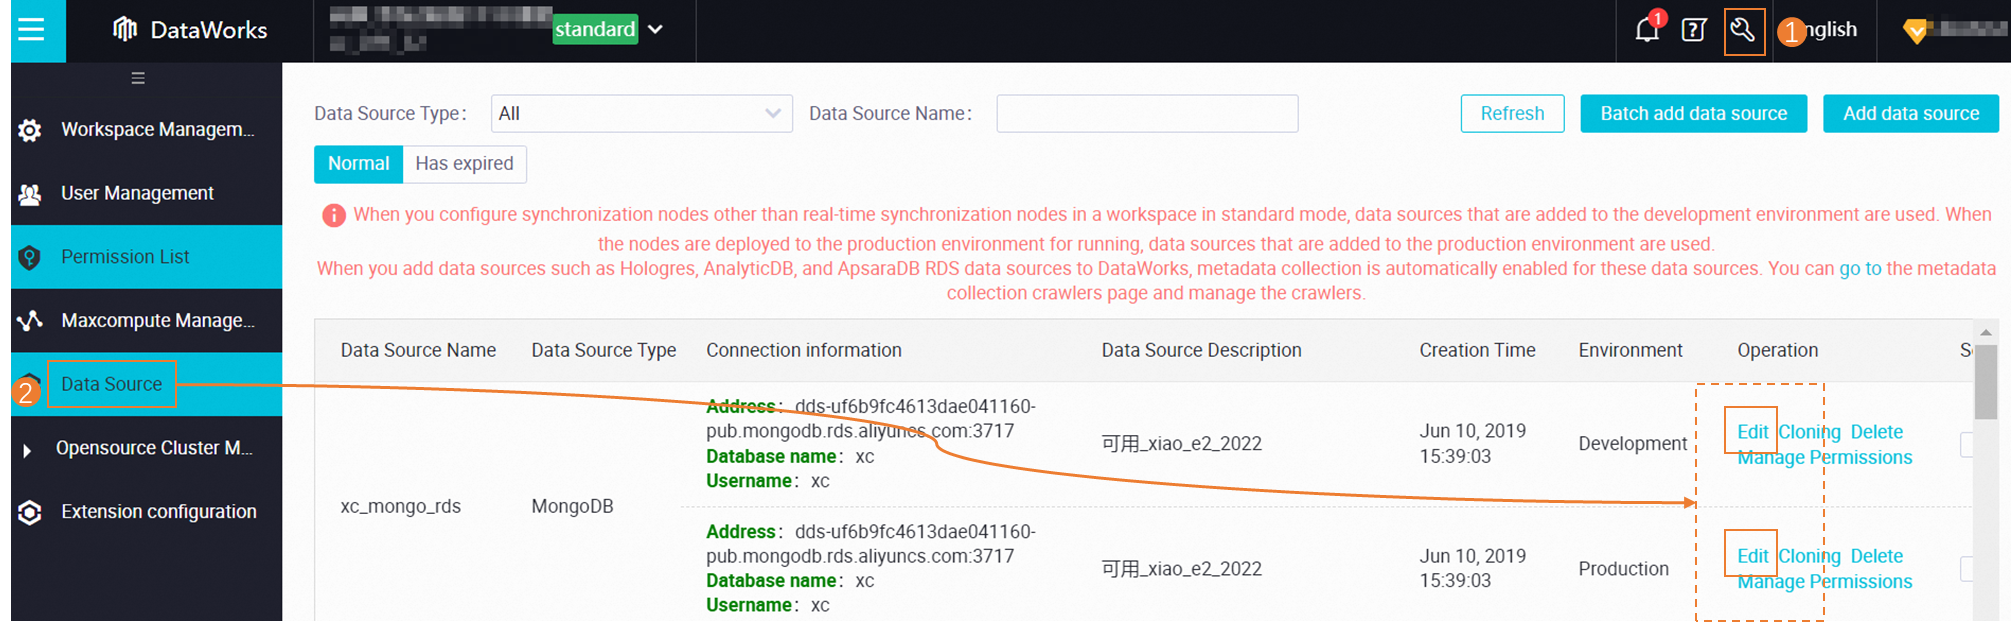 View the access identity of a data source that you add to DataWorks